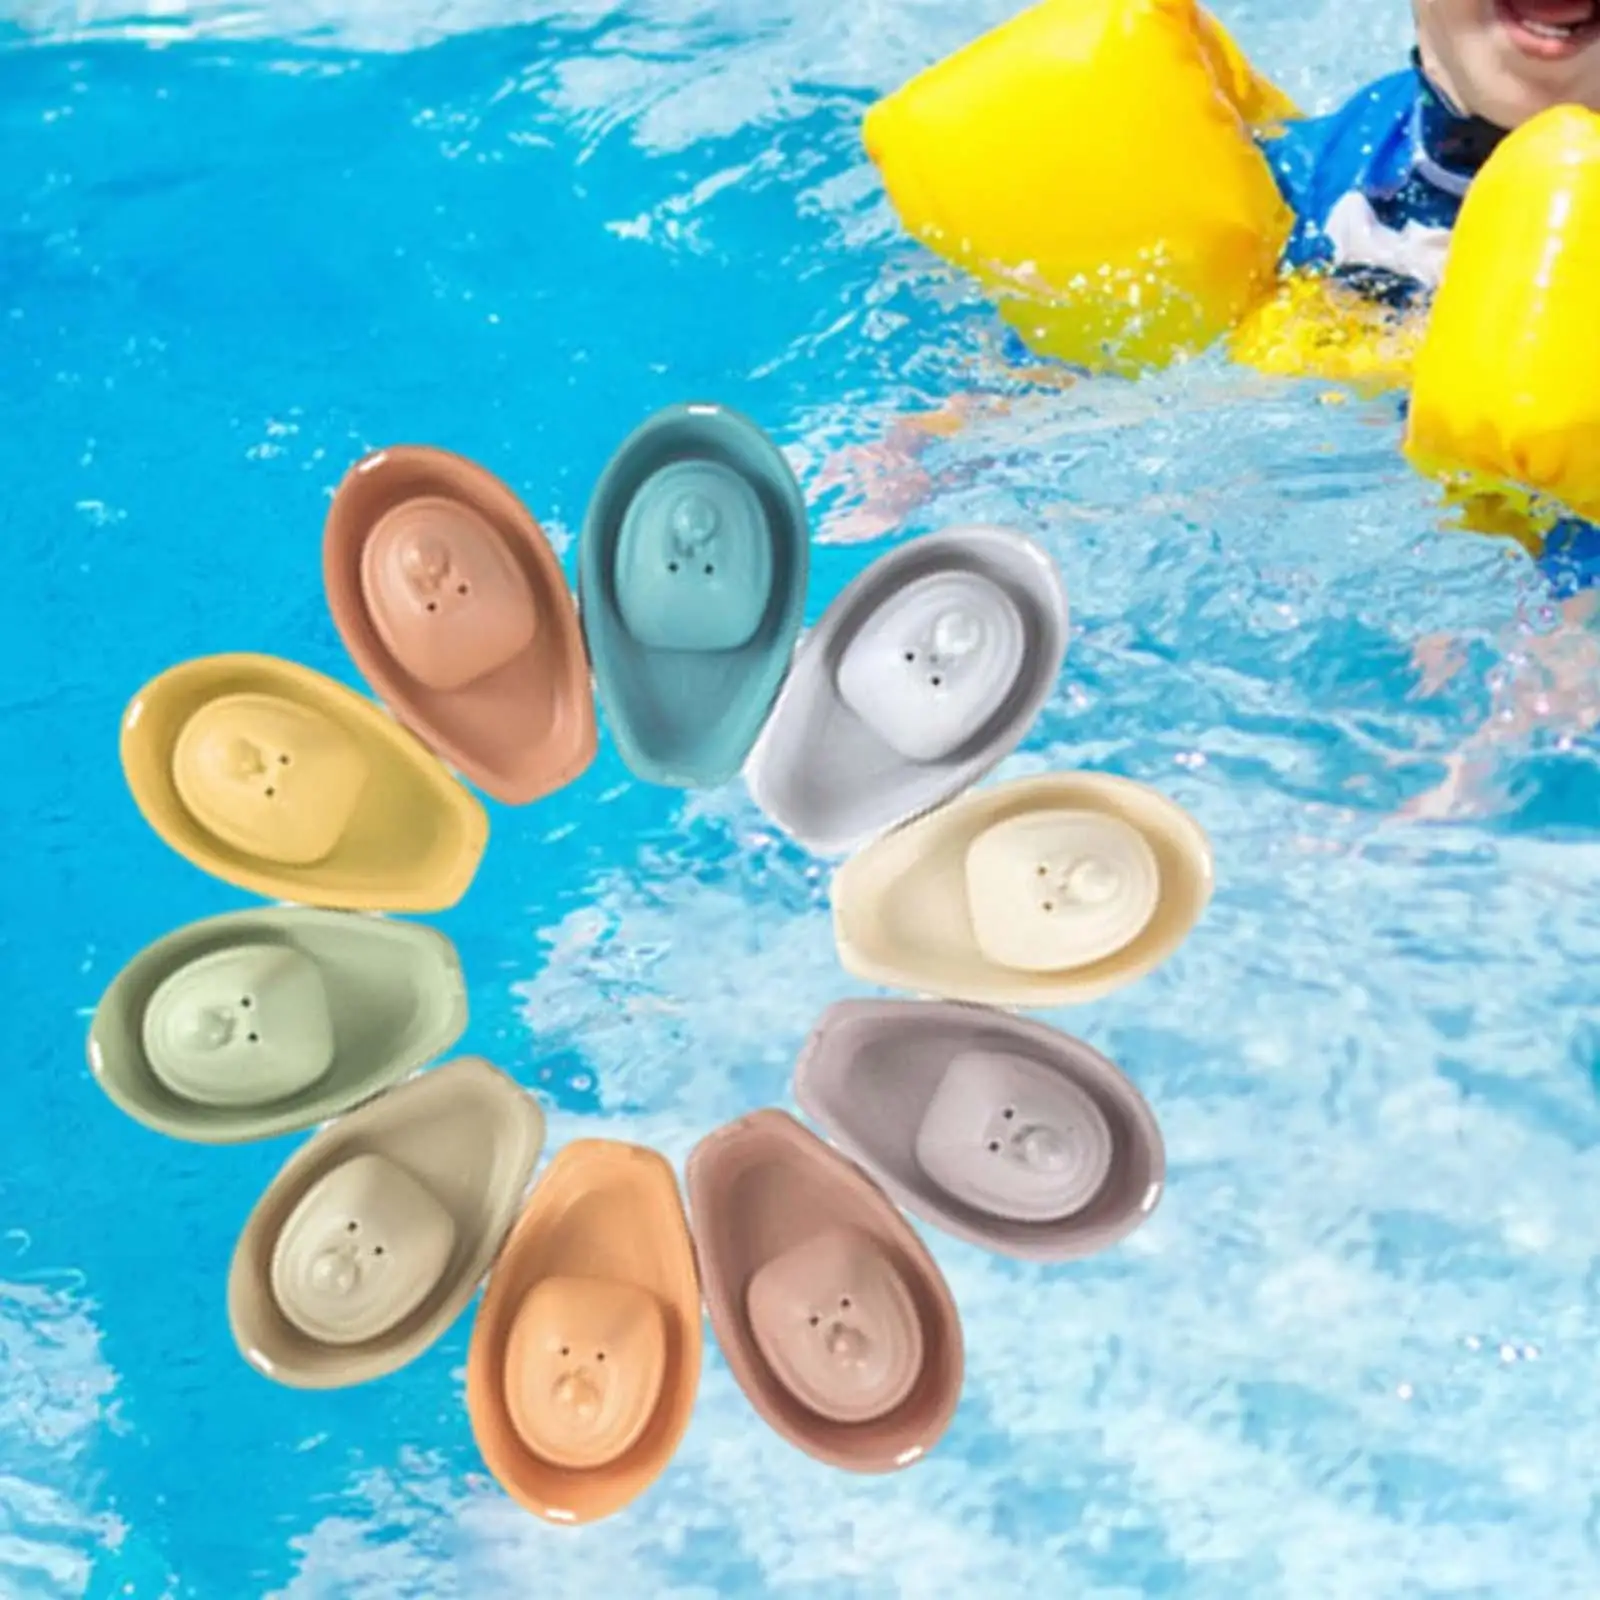 10x Stackable Bath Boats Toys Bath Pool Beach Toy Water Stacking Boat Bathtub Toy Educational for Boys Girls Party